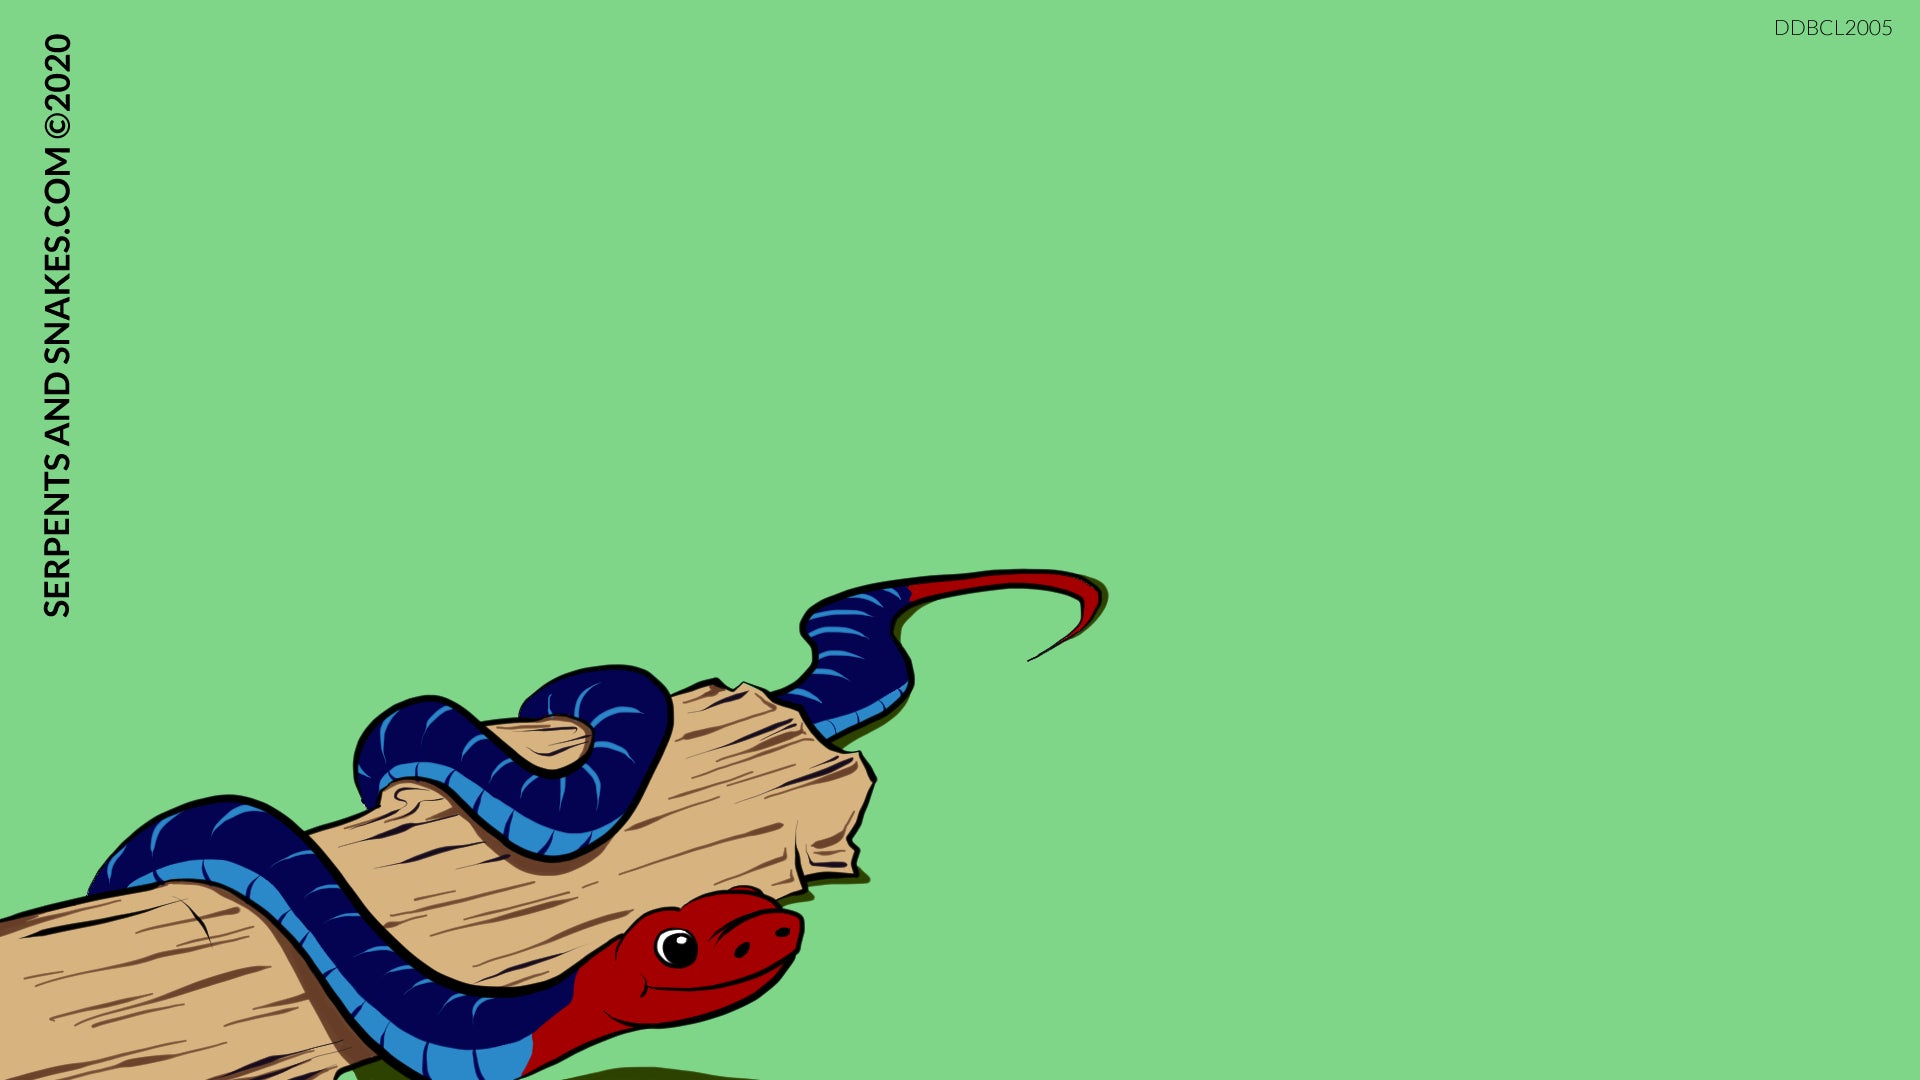 Digital background. The background colour is a solid green. In the lower left corner is a smiling cartoon blue coral snake. Its head and tail are red. The upper body is dark blue and the underside is light blue. The snake is draped over a jagged piece of wood. Created by Serpents and Snakes. Copyright 2020.